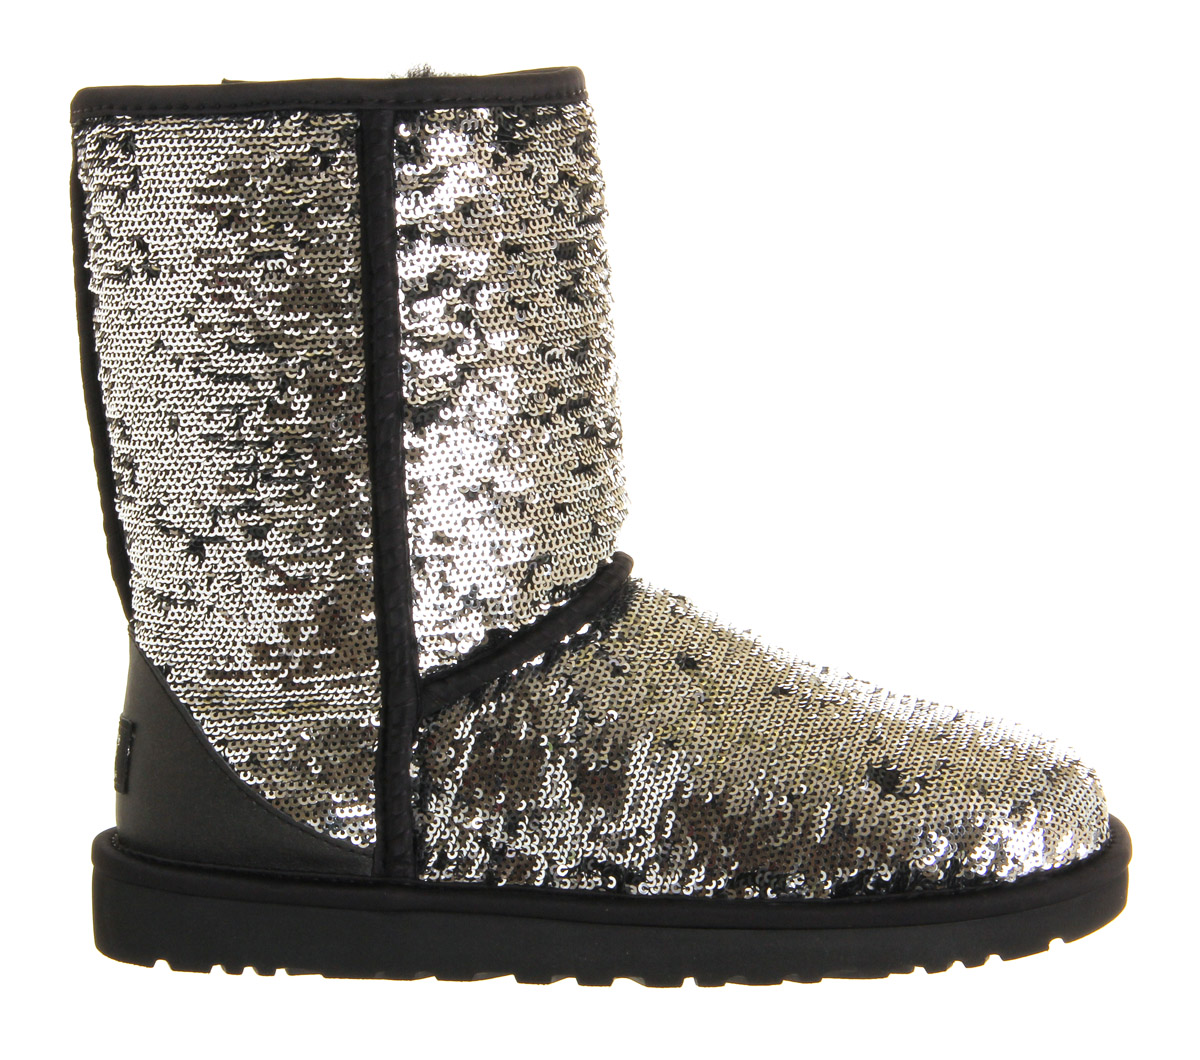 Lyst - Ugg Classic Short Sparkle Sequined Boots in Metallic